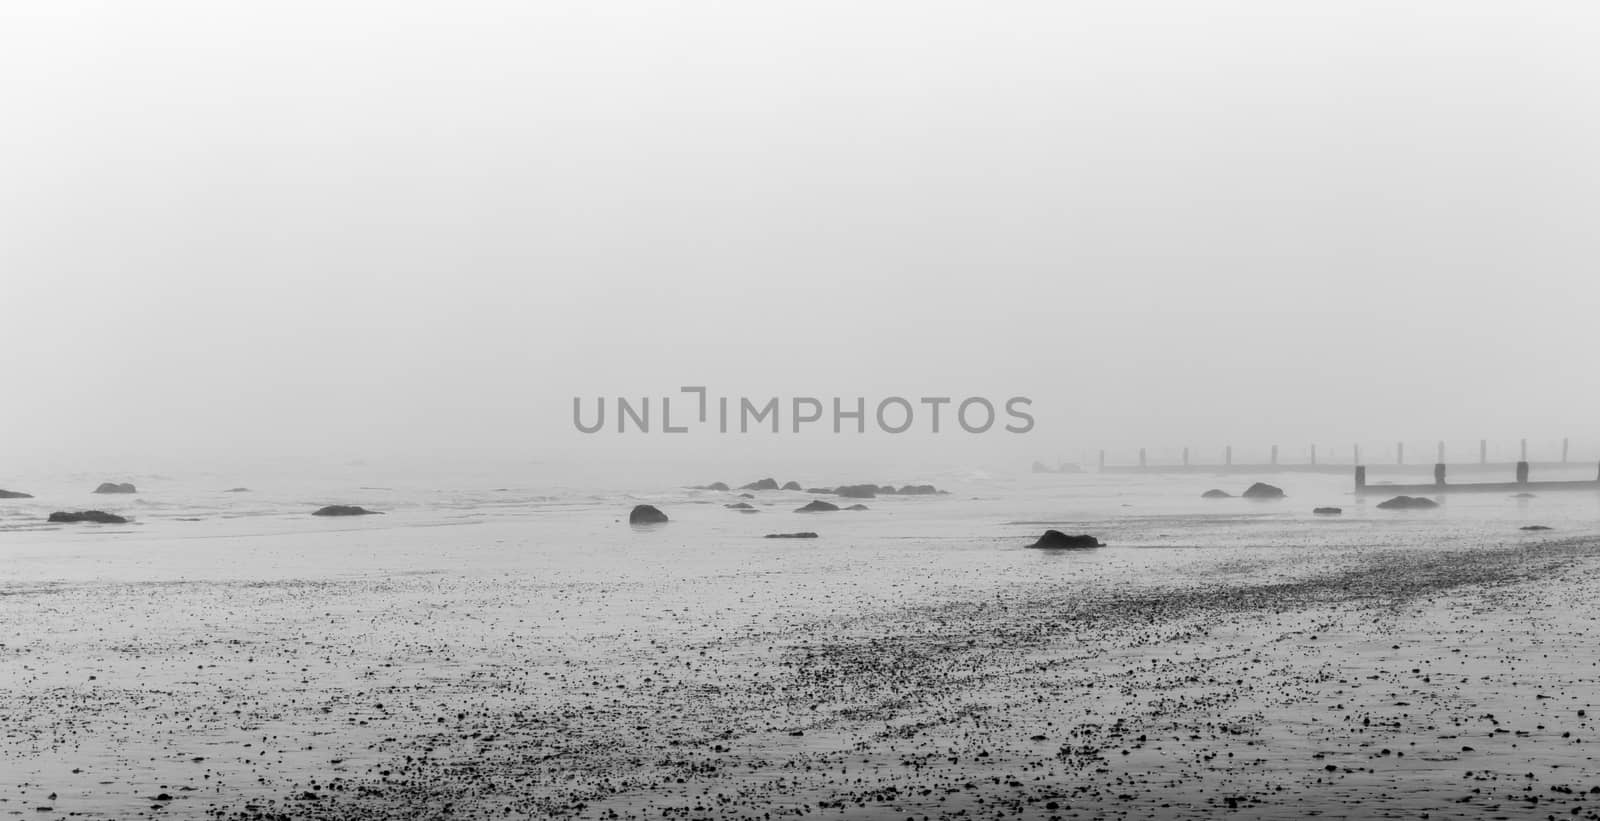 Monochrome Misty beach in the winter with rocks in the foreground and sea breaks behind